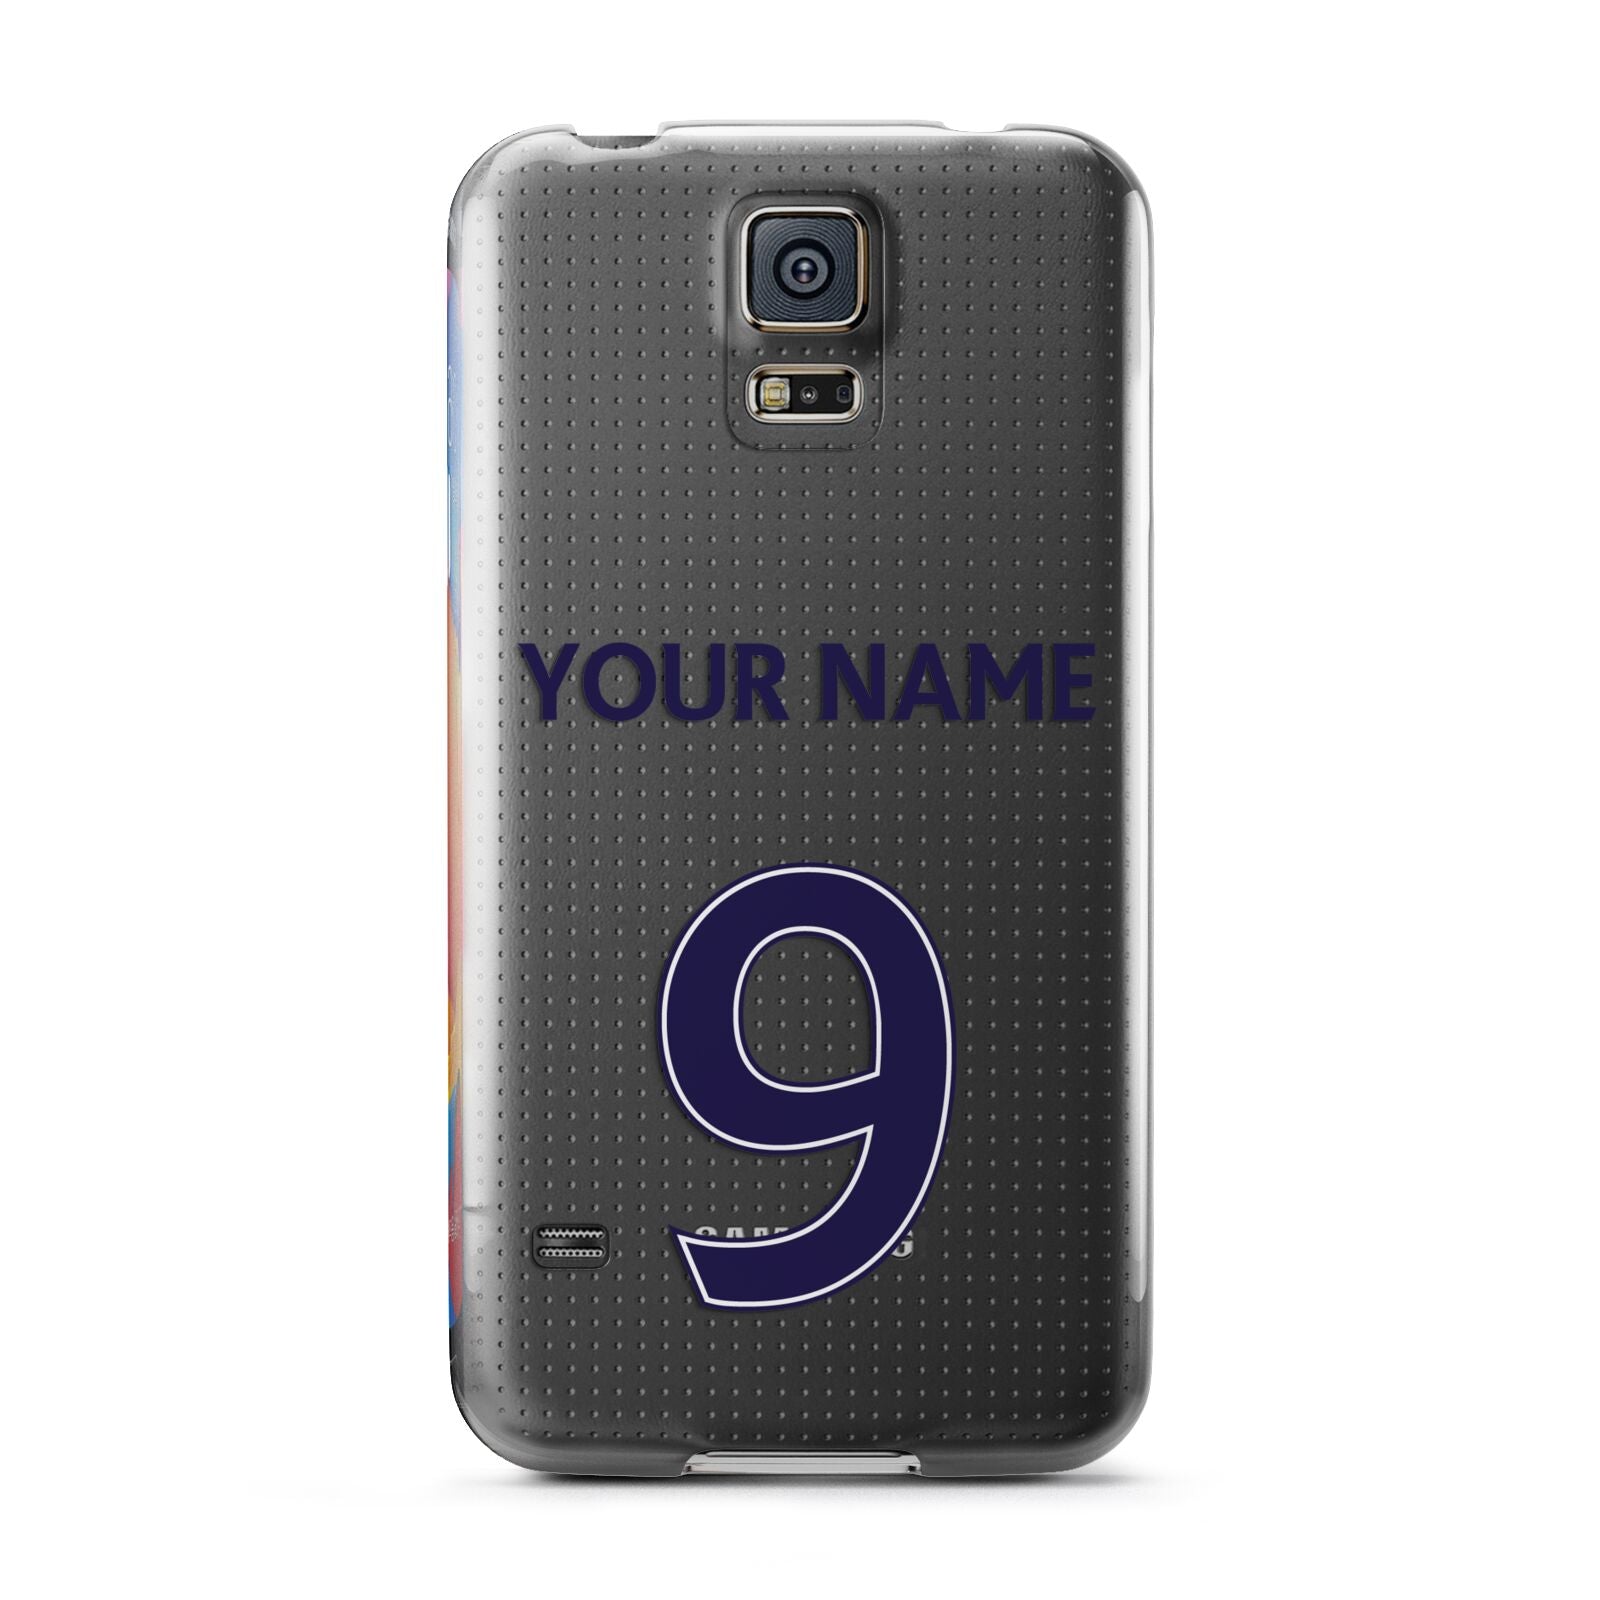 Personalised Football Name and Number Samsung Galaxy S5 Case